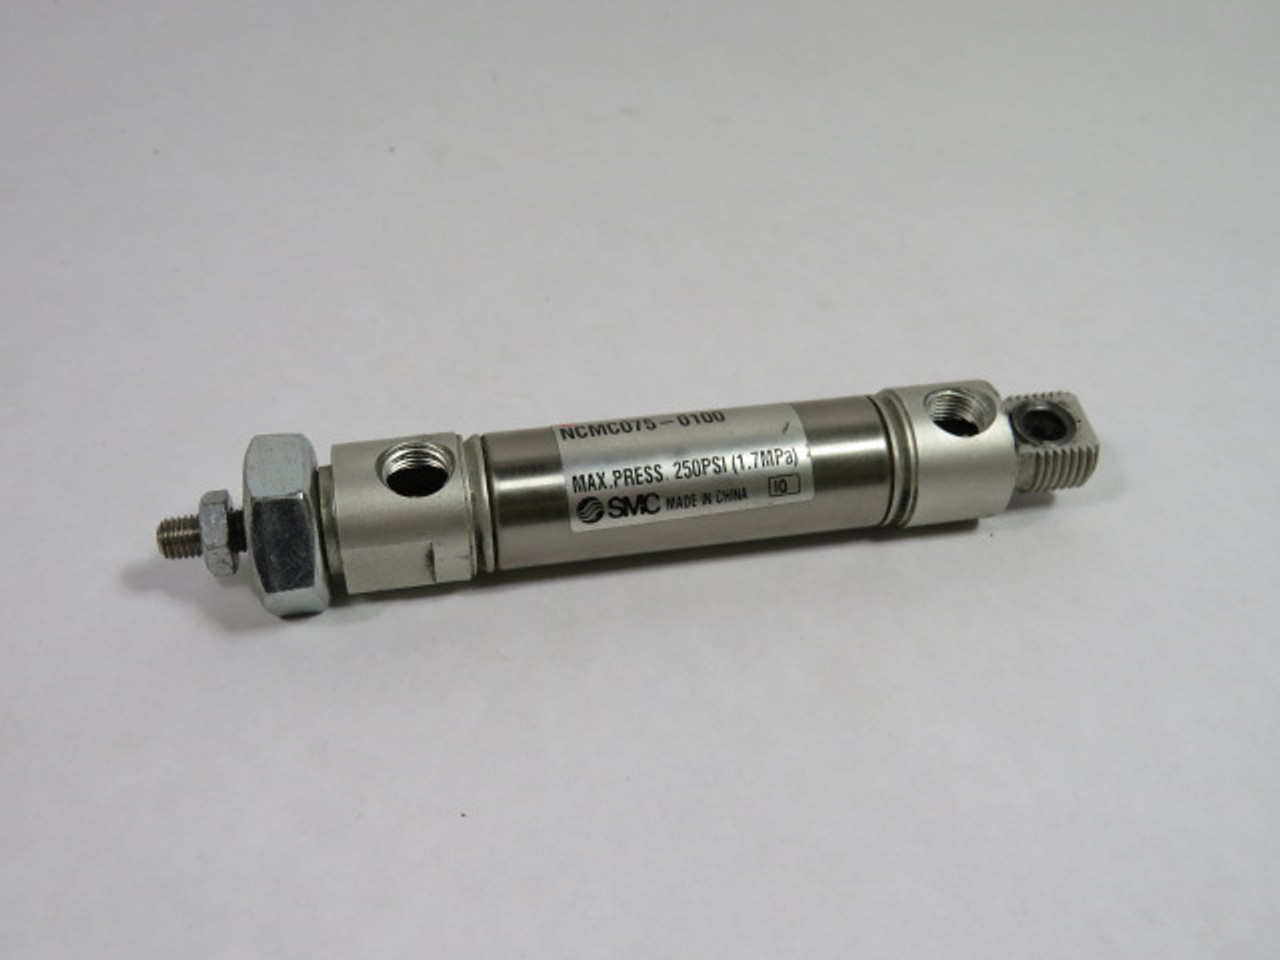 SMC NCMC075-0100 Pneumatic Air Cylinder 3/4" Bore 1" Stroke USED